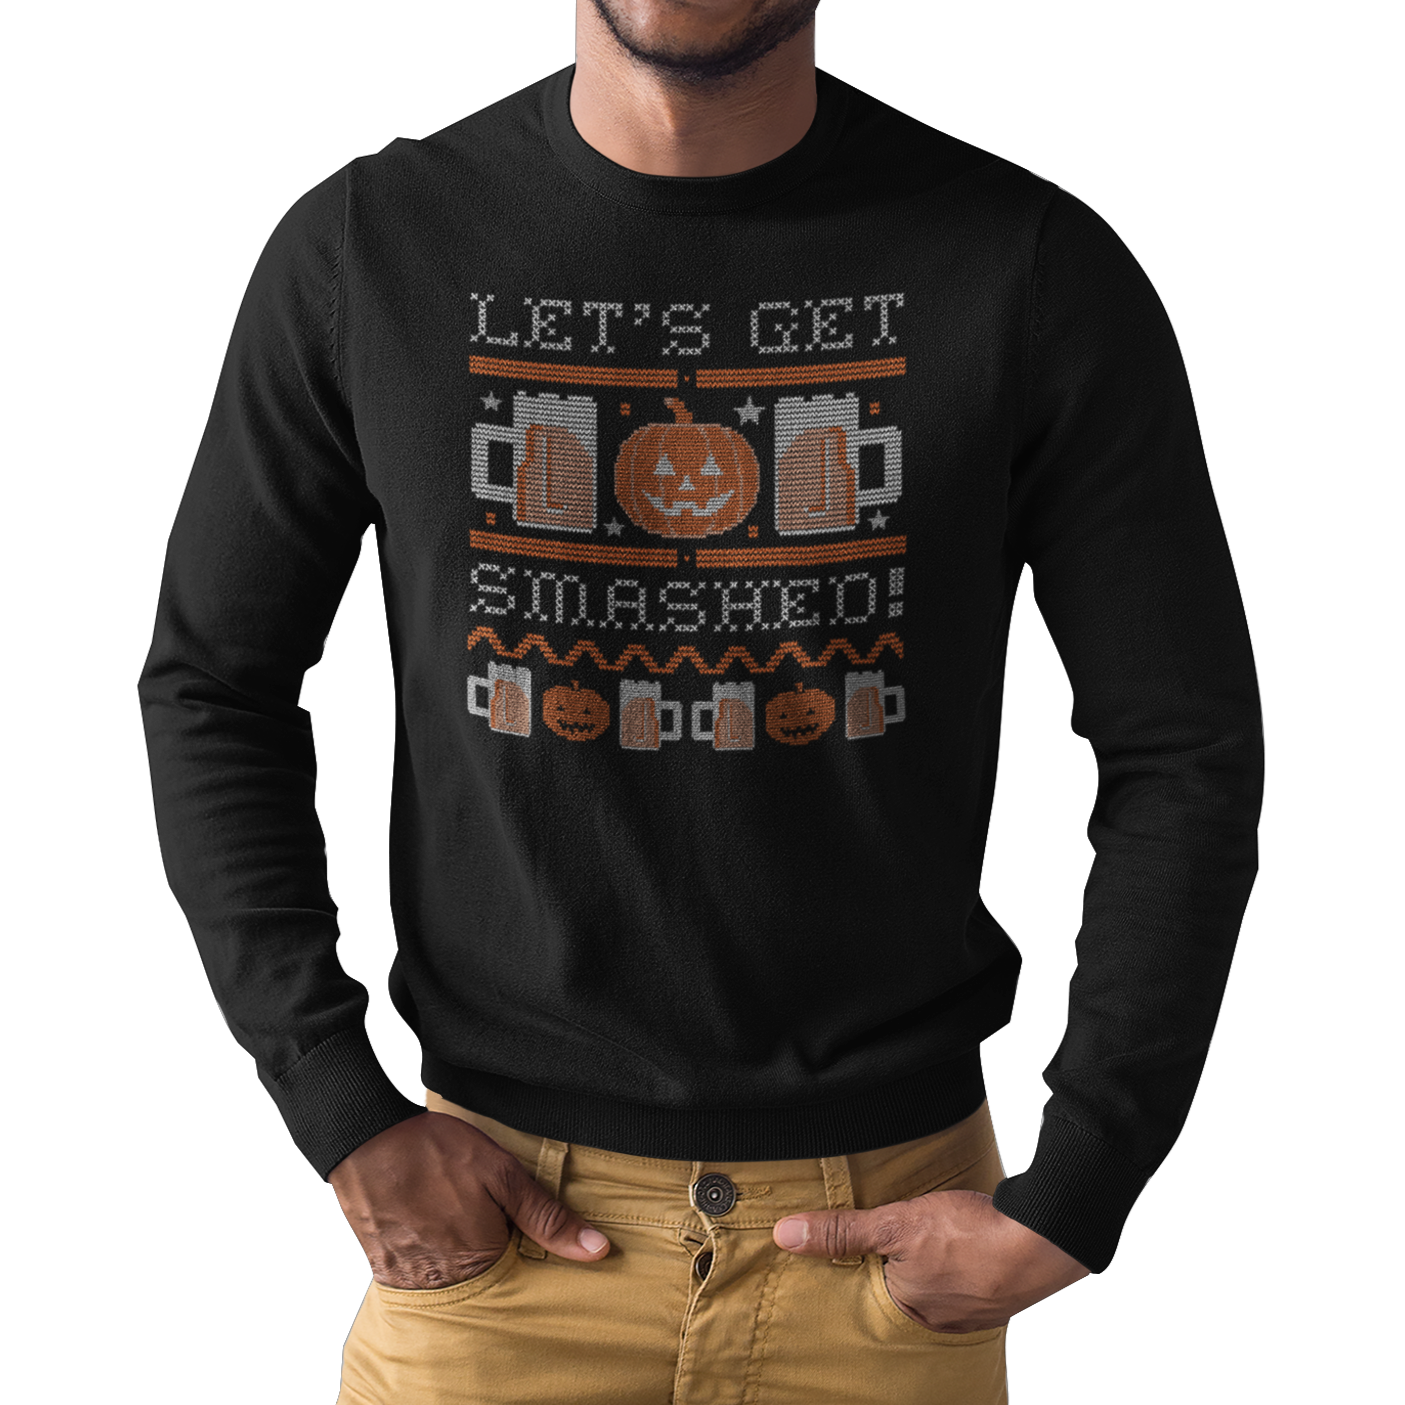 Let's Get Smashed Ugly Halloween Sweater Beer Longsleeve T-Shirt